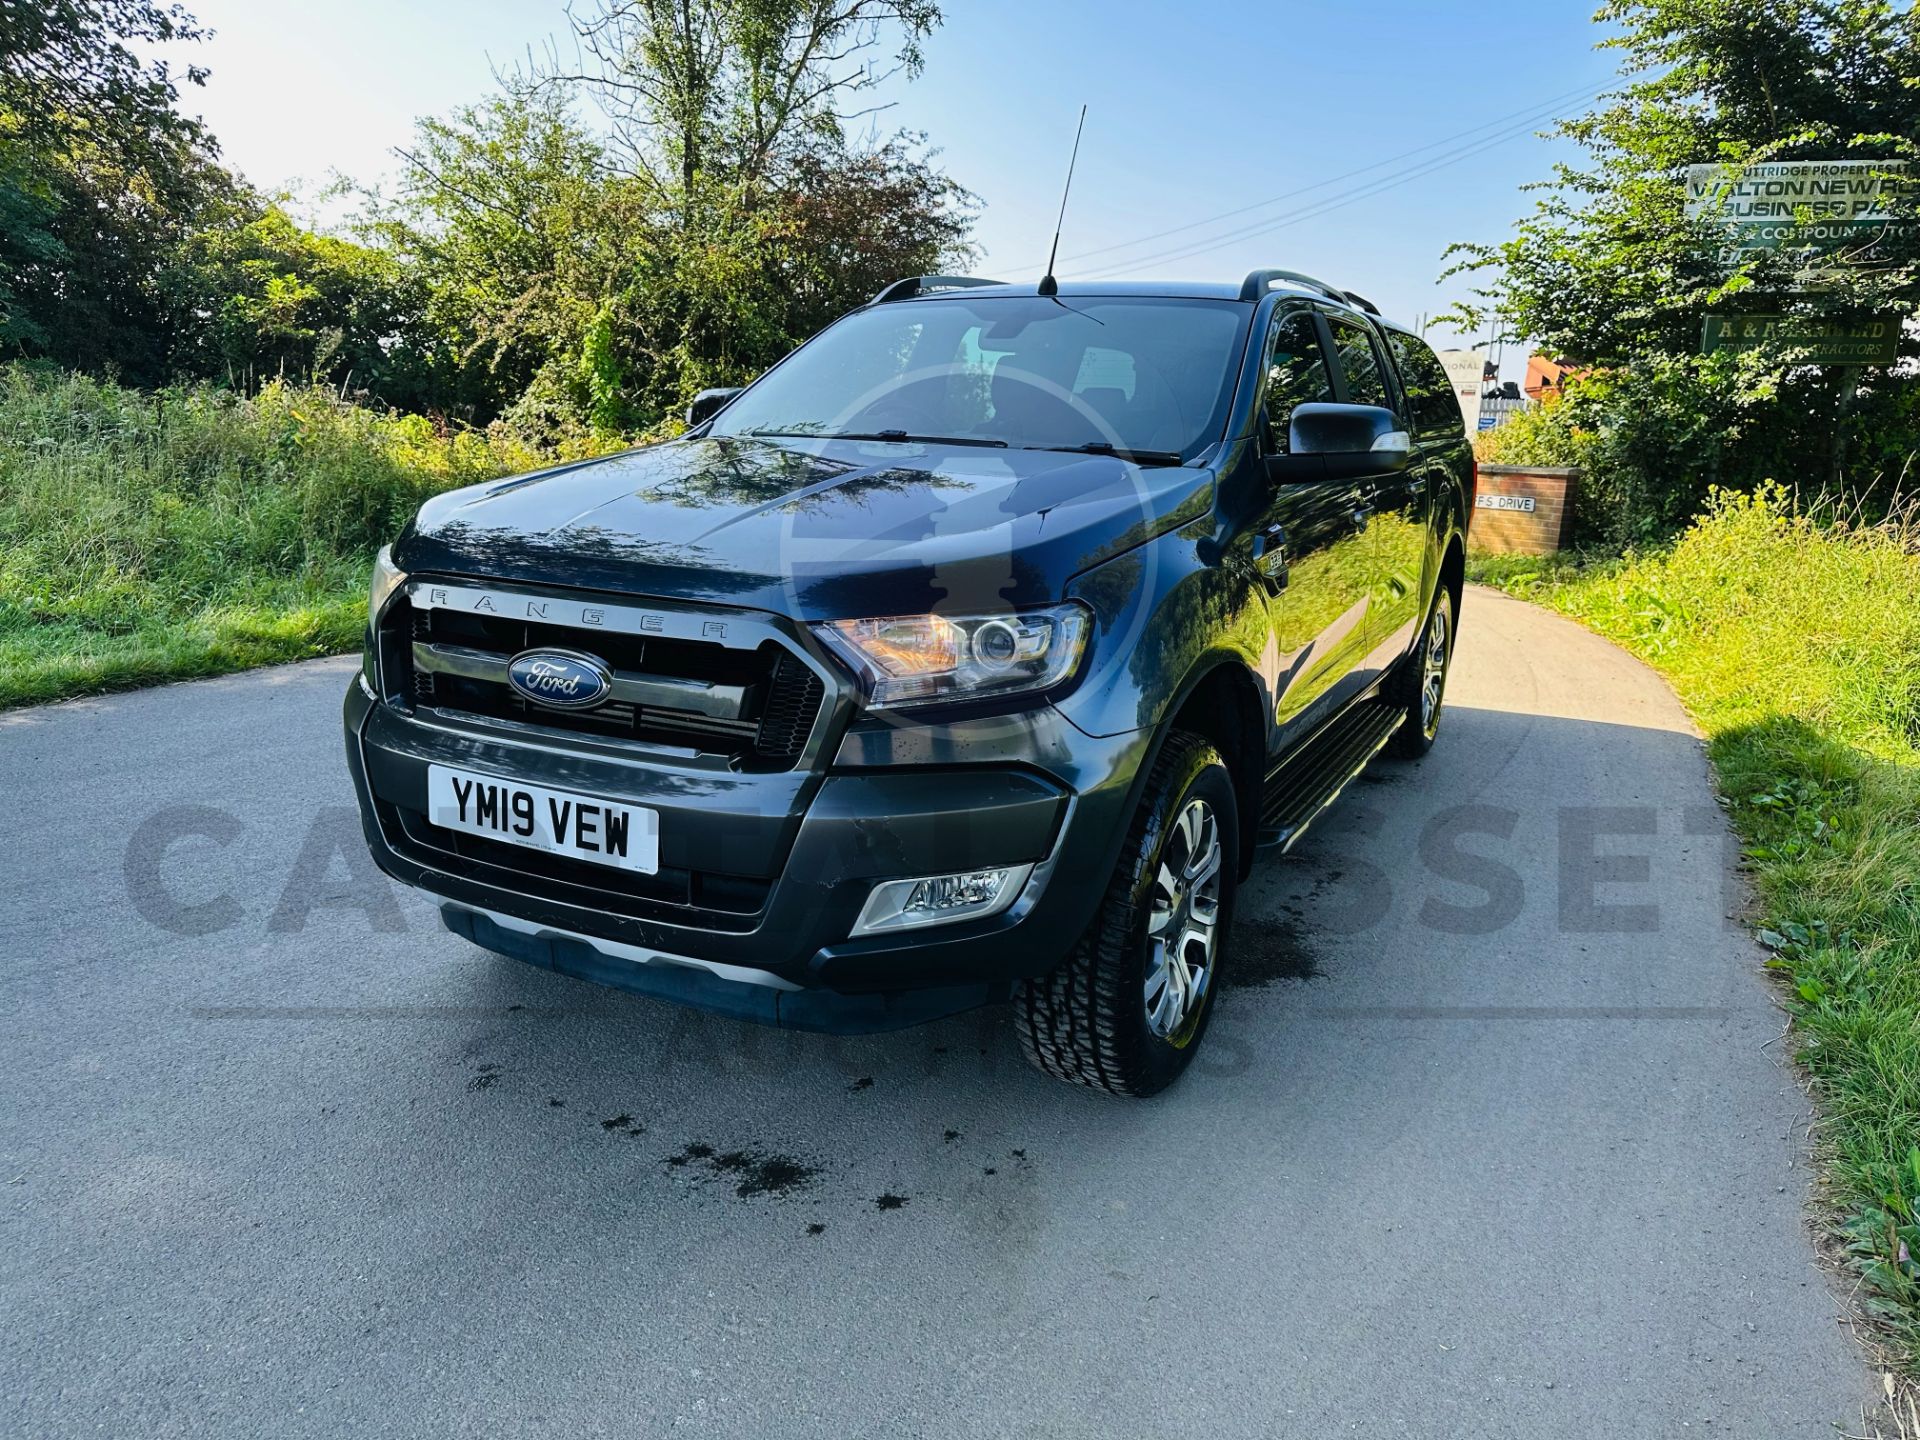 (ON SALE) FORD RANGER *WILDTRAK EDITION* DOUBLE CAB PICK-UP (2019 - EURO 6) 3.2 TDCI AUTO (1 OWNER) - Image 5 of 34